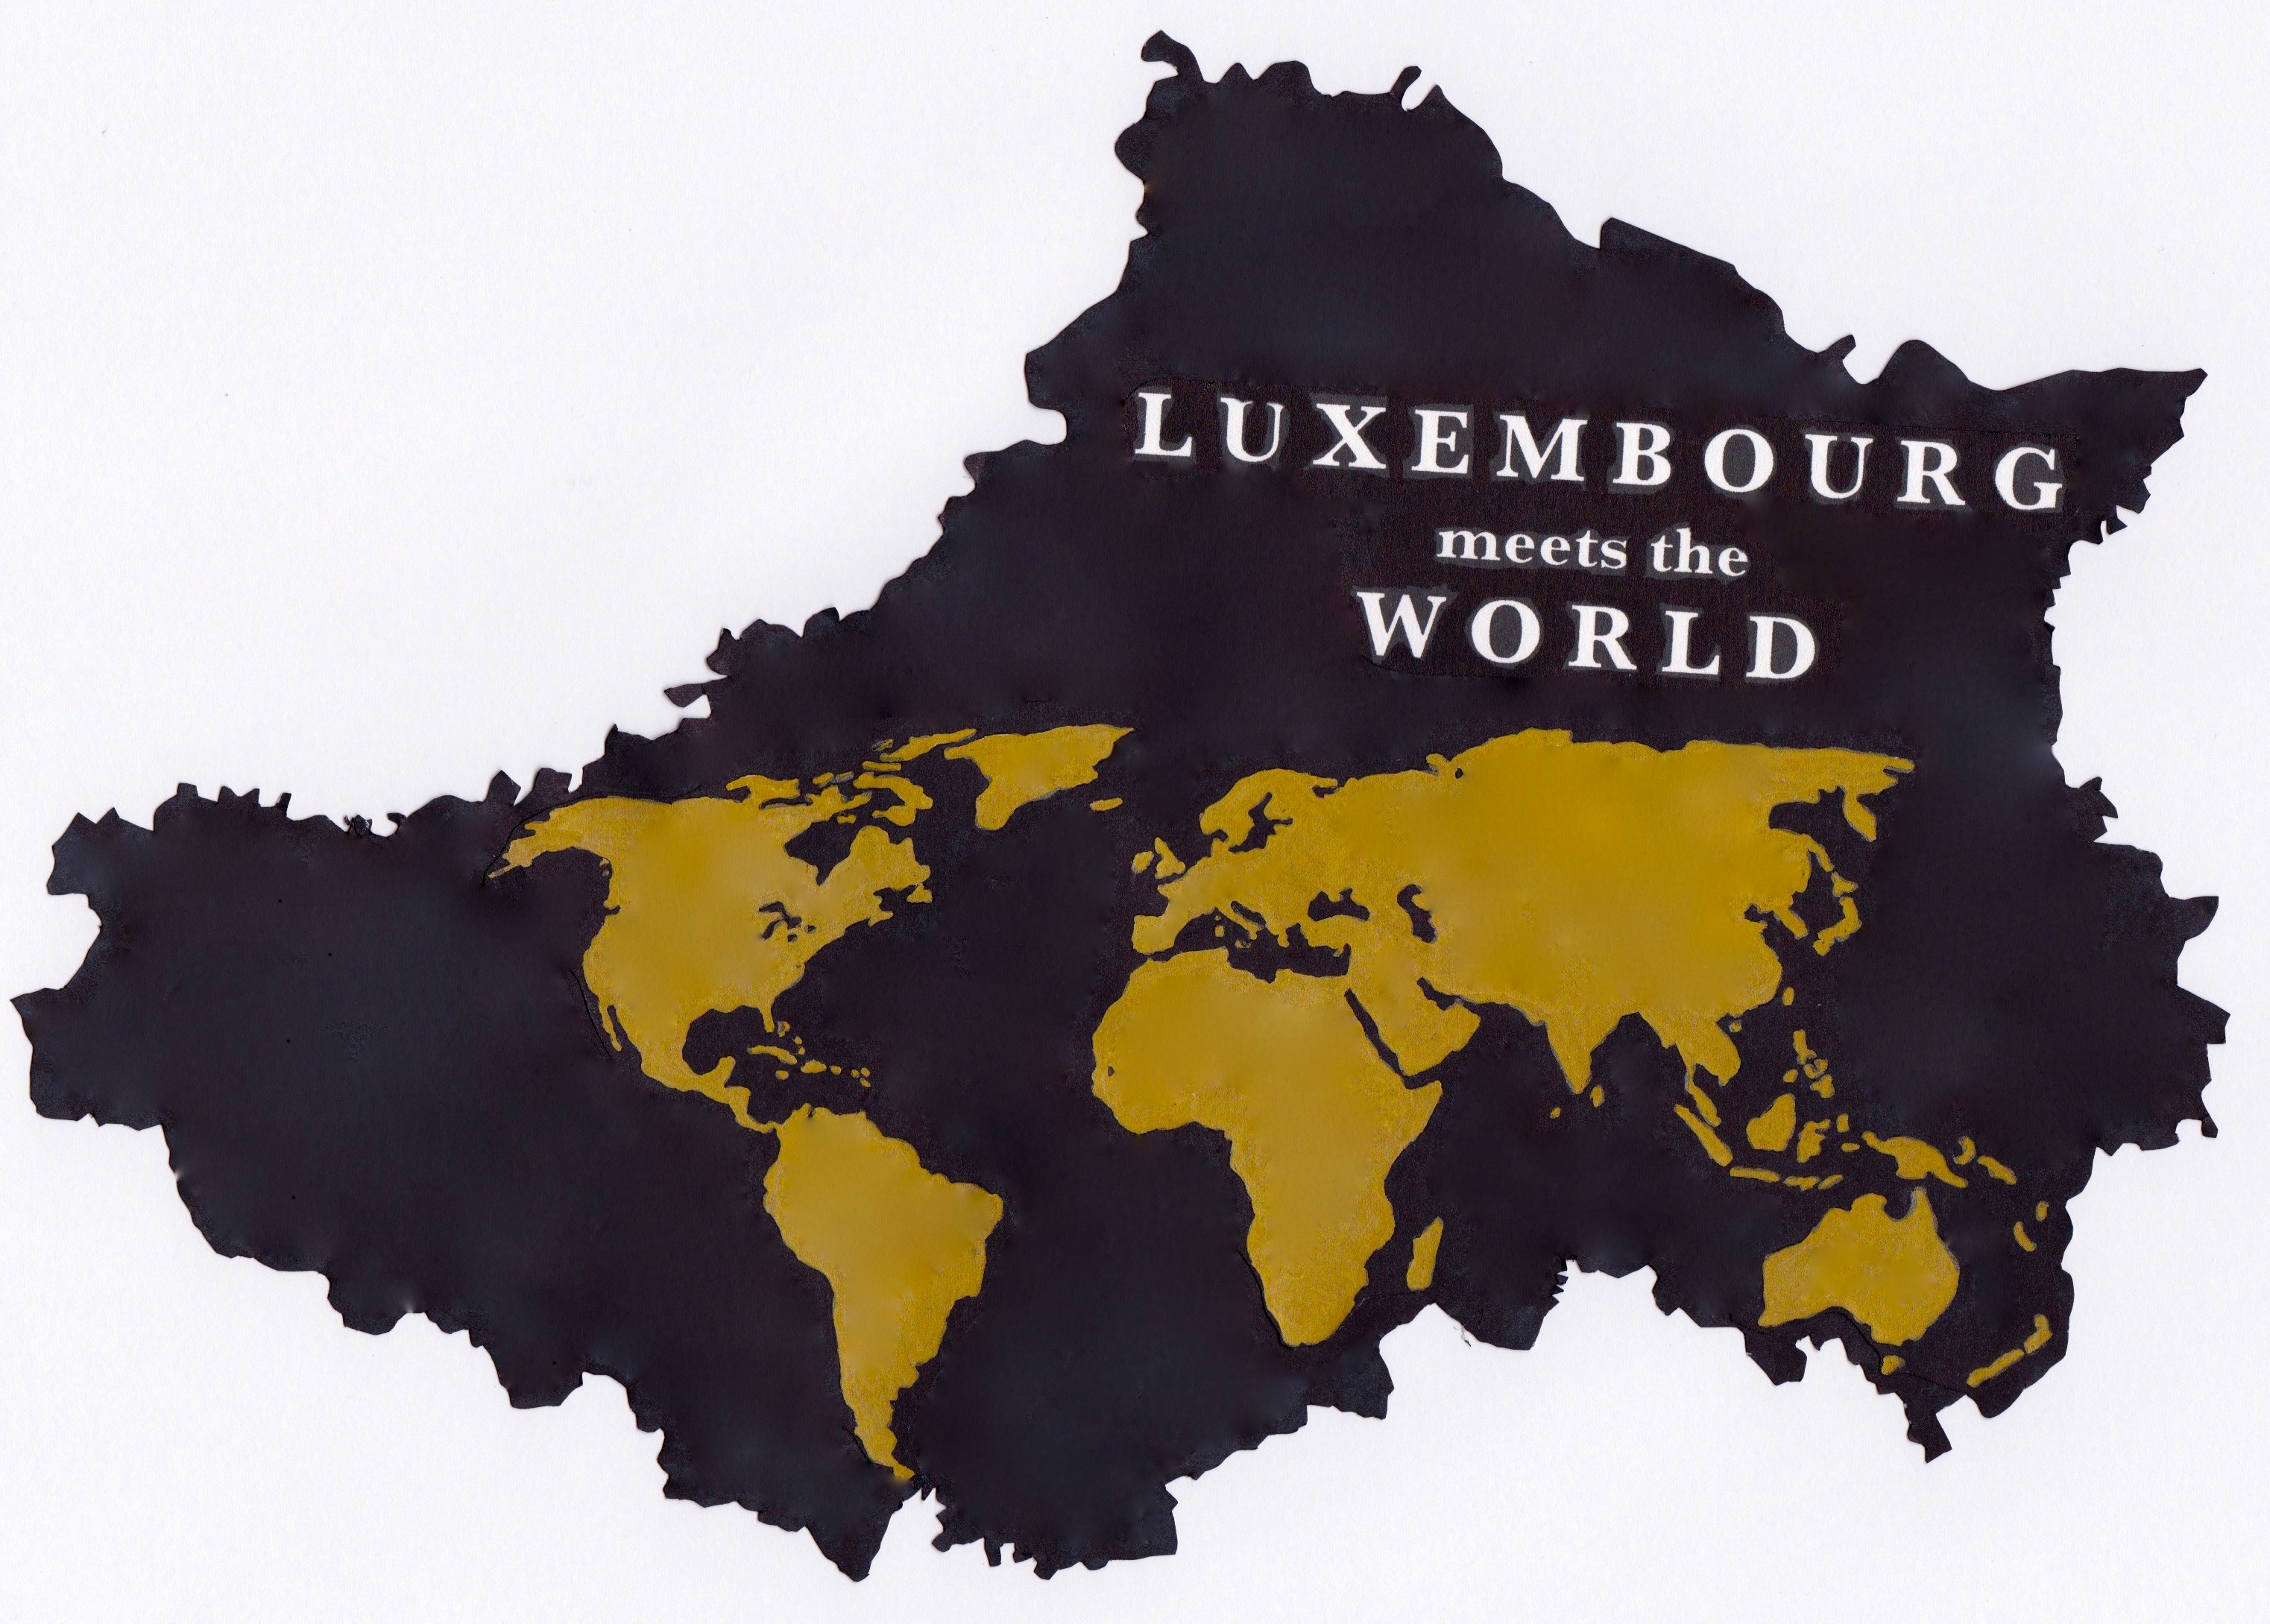 Luxembourg meets the World